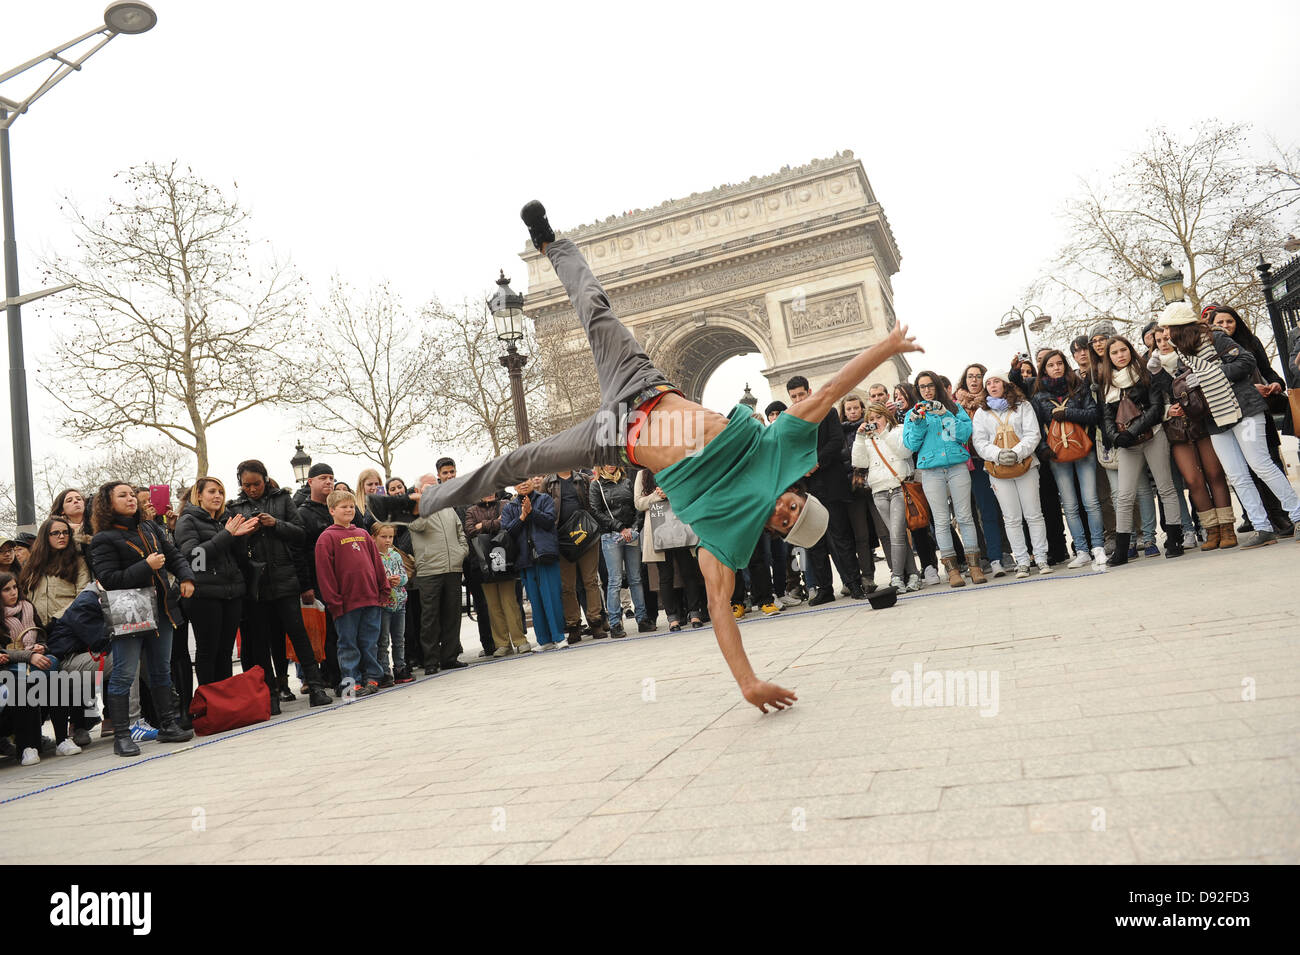 Break dancer entertaining crowd on the street Paris France. Picture by Sam Bagnall Stock Photo